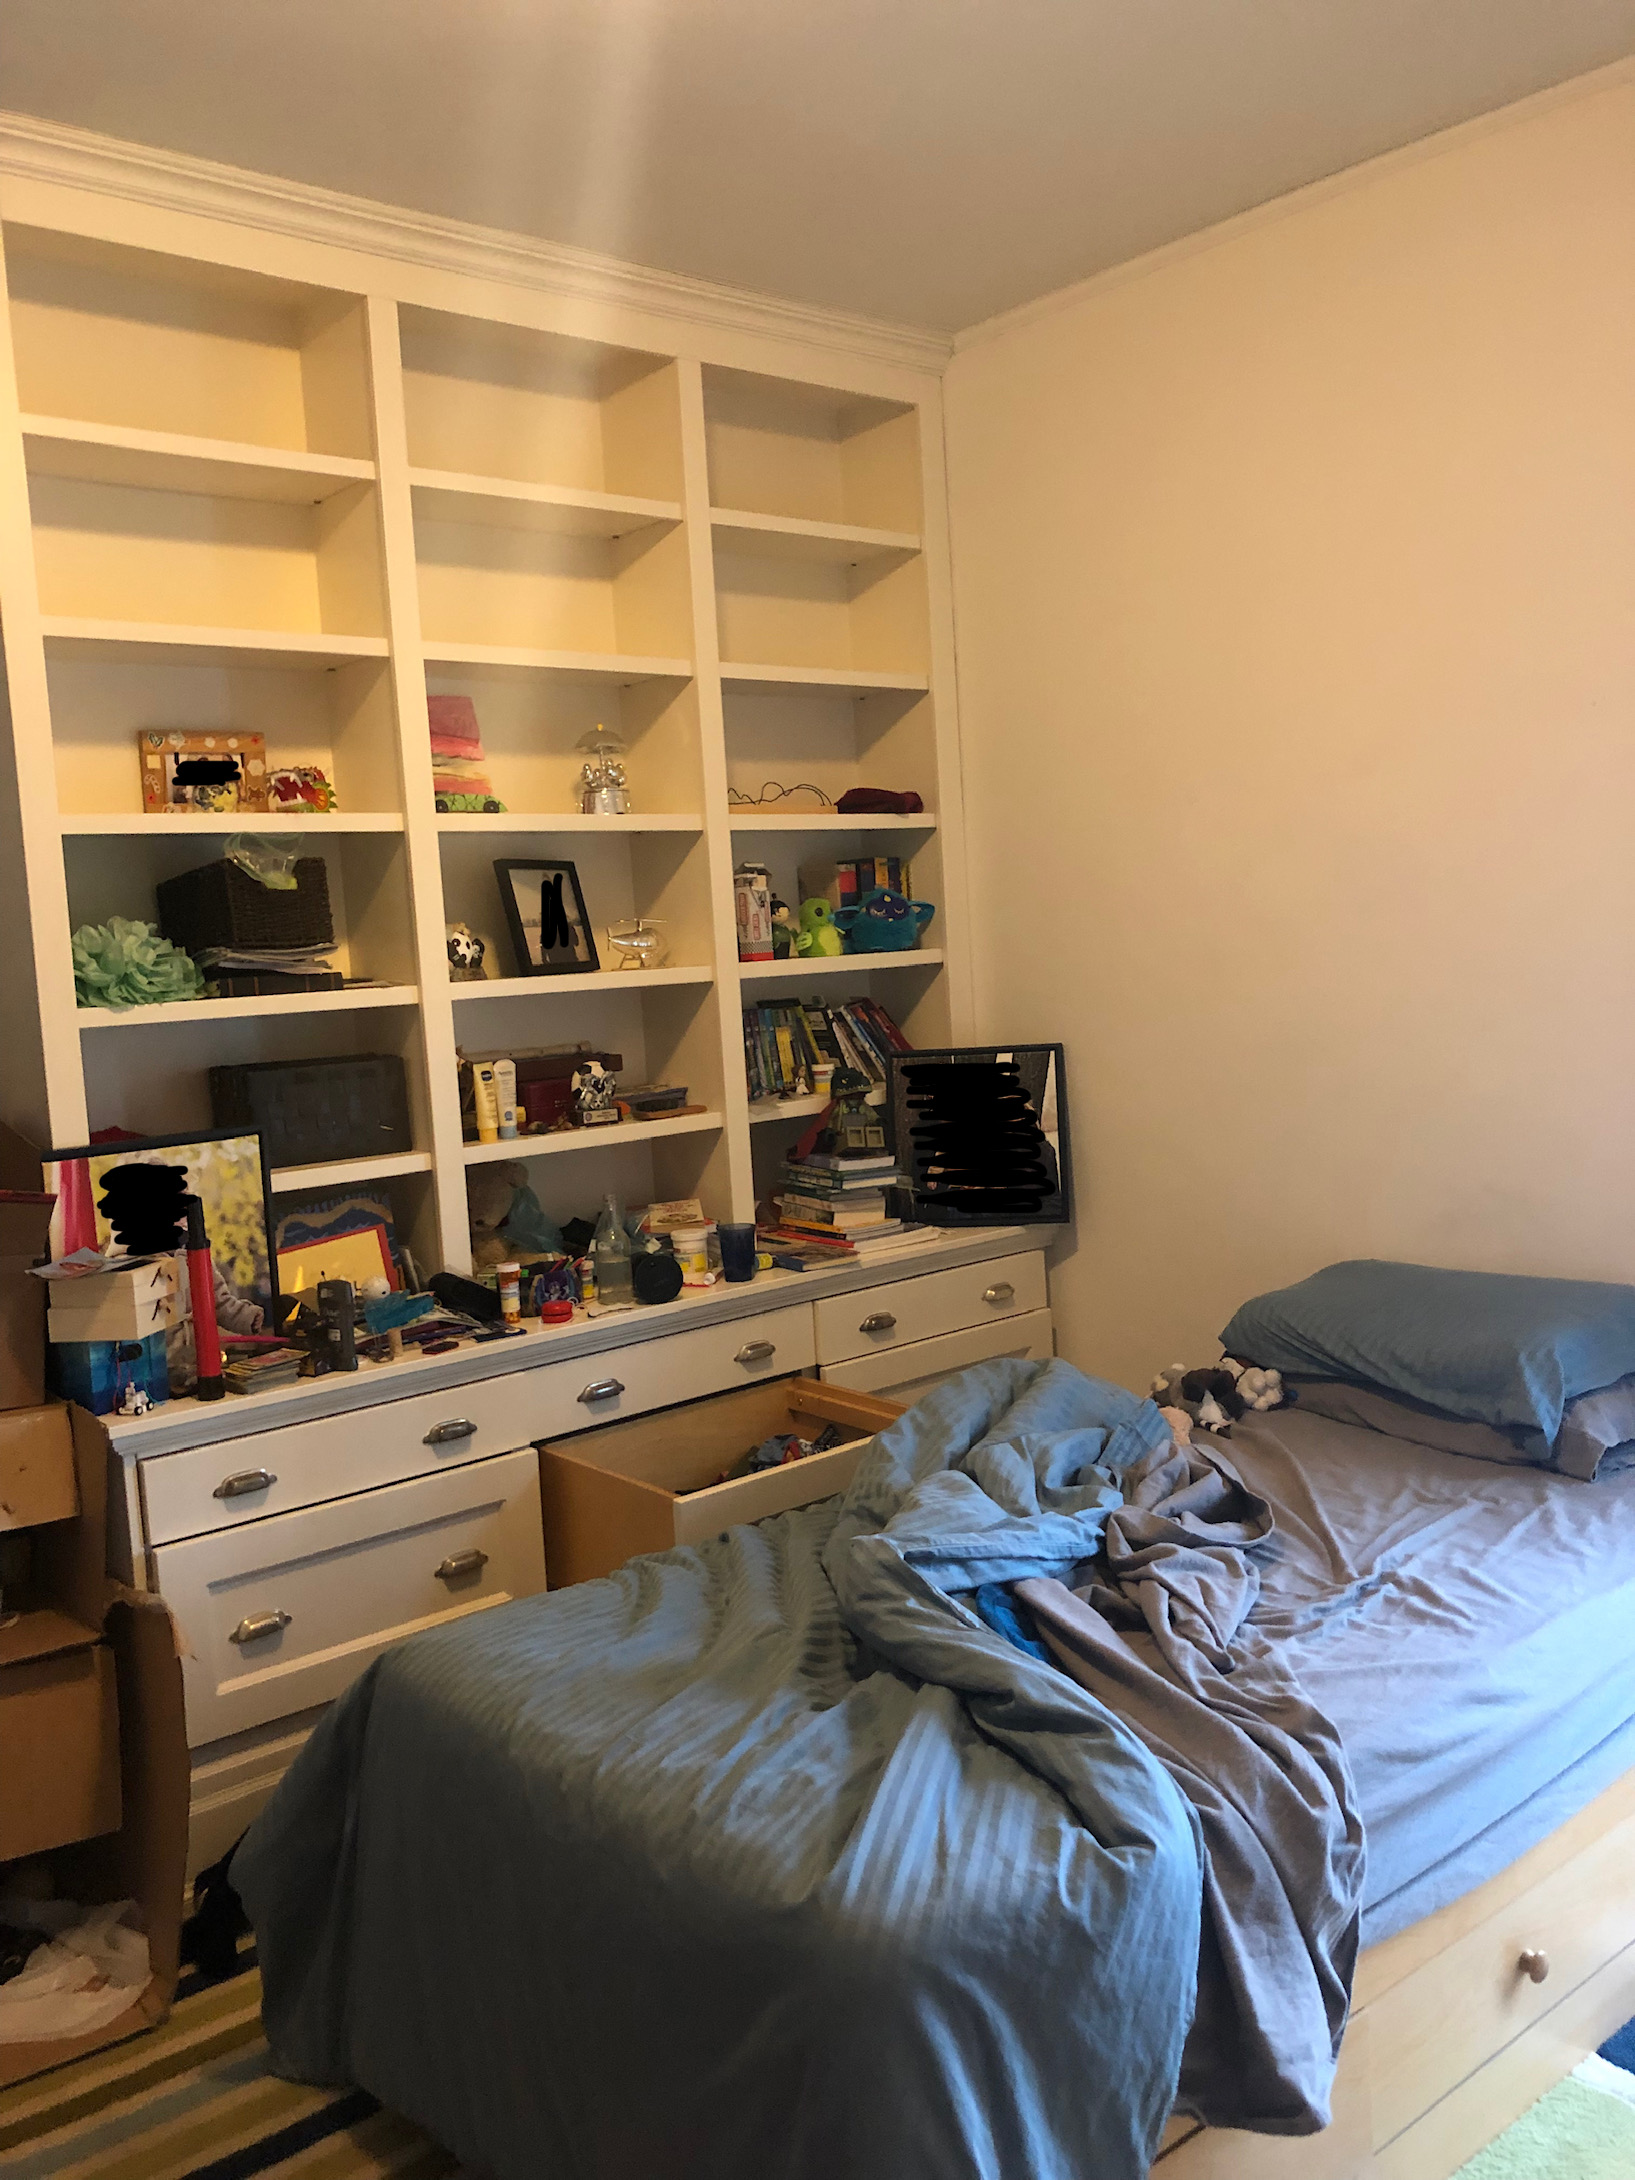 before photo of cluttered bedroom with open shelves and unmade bed